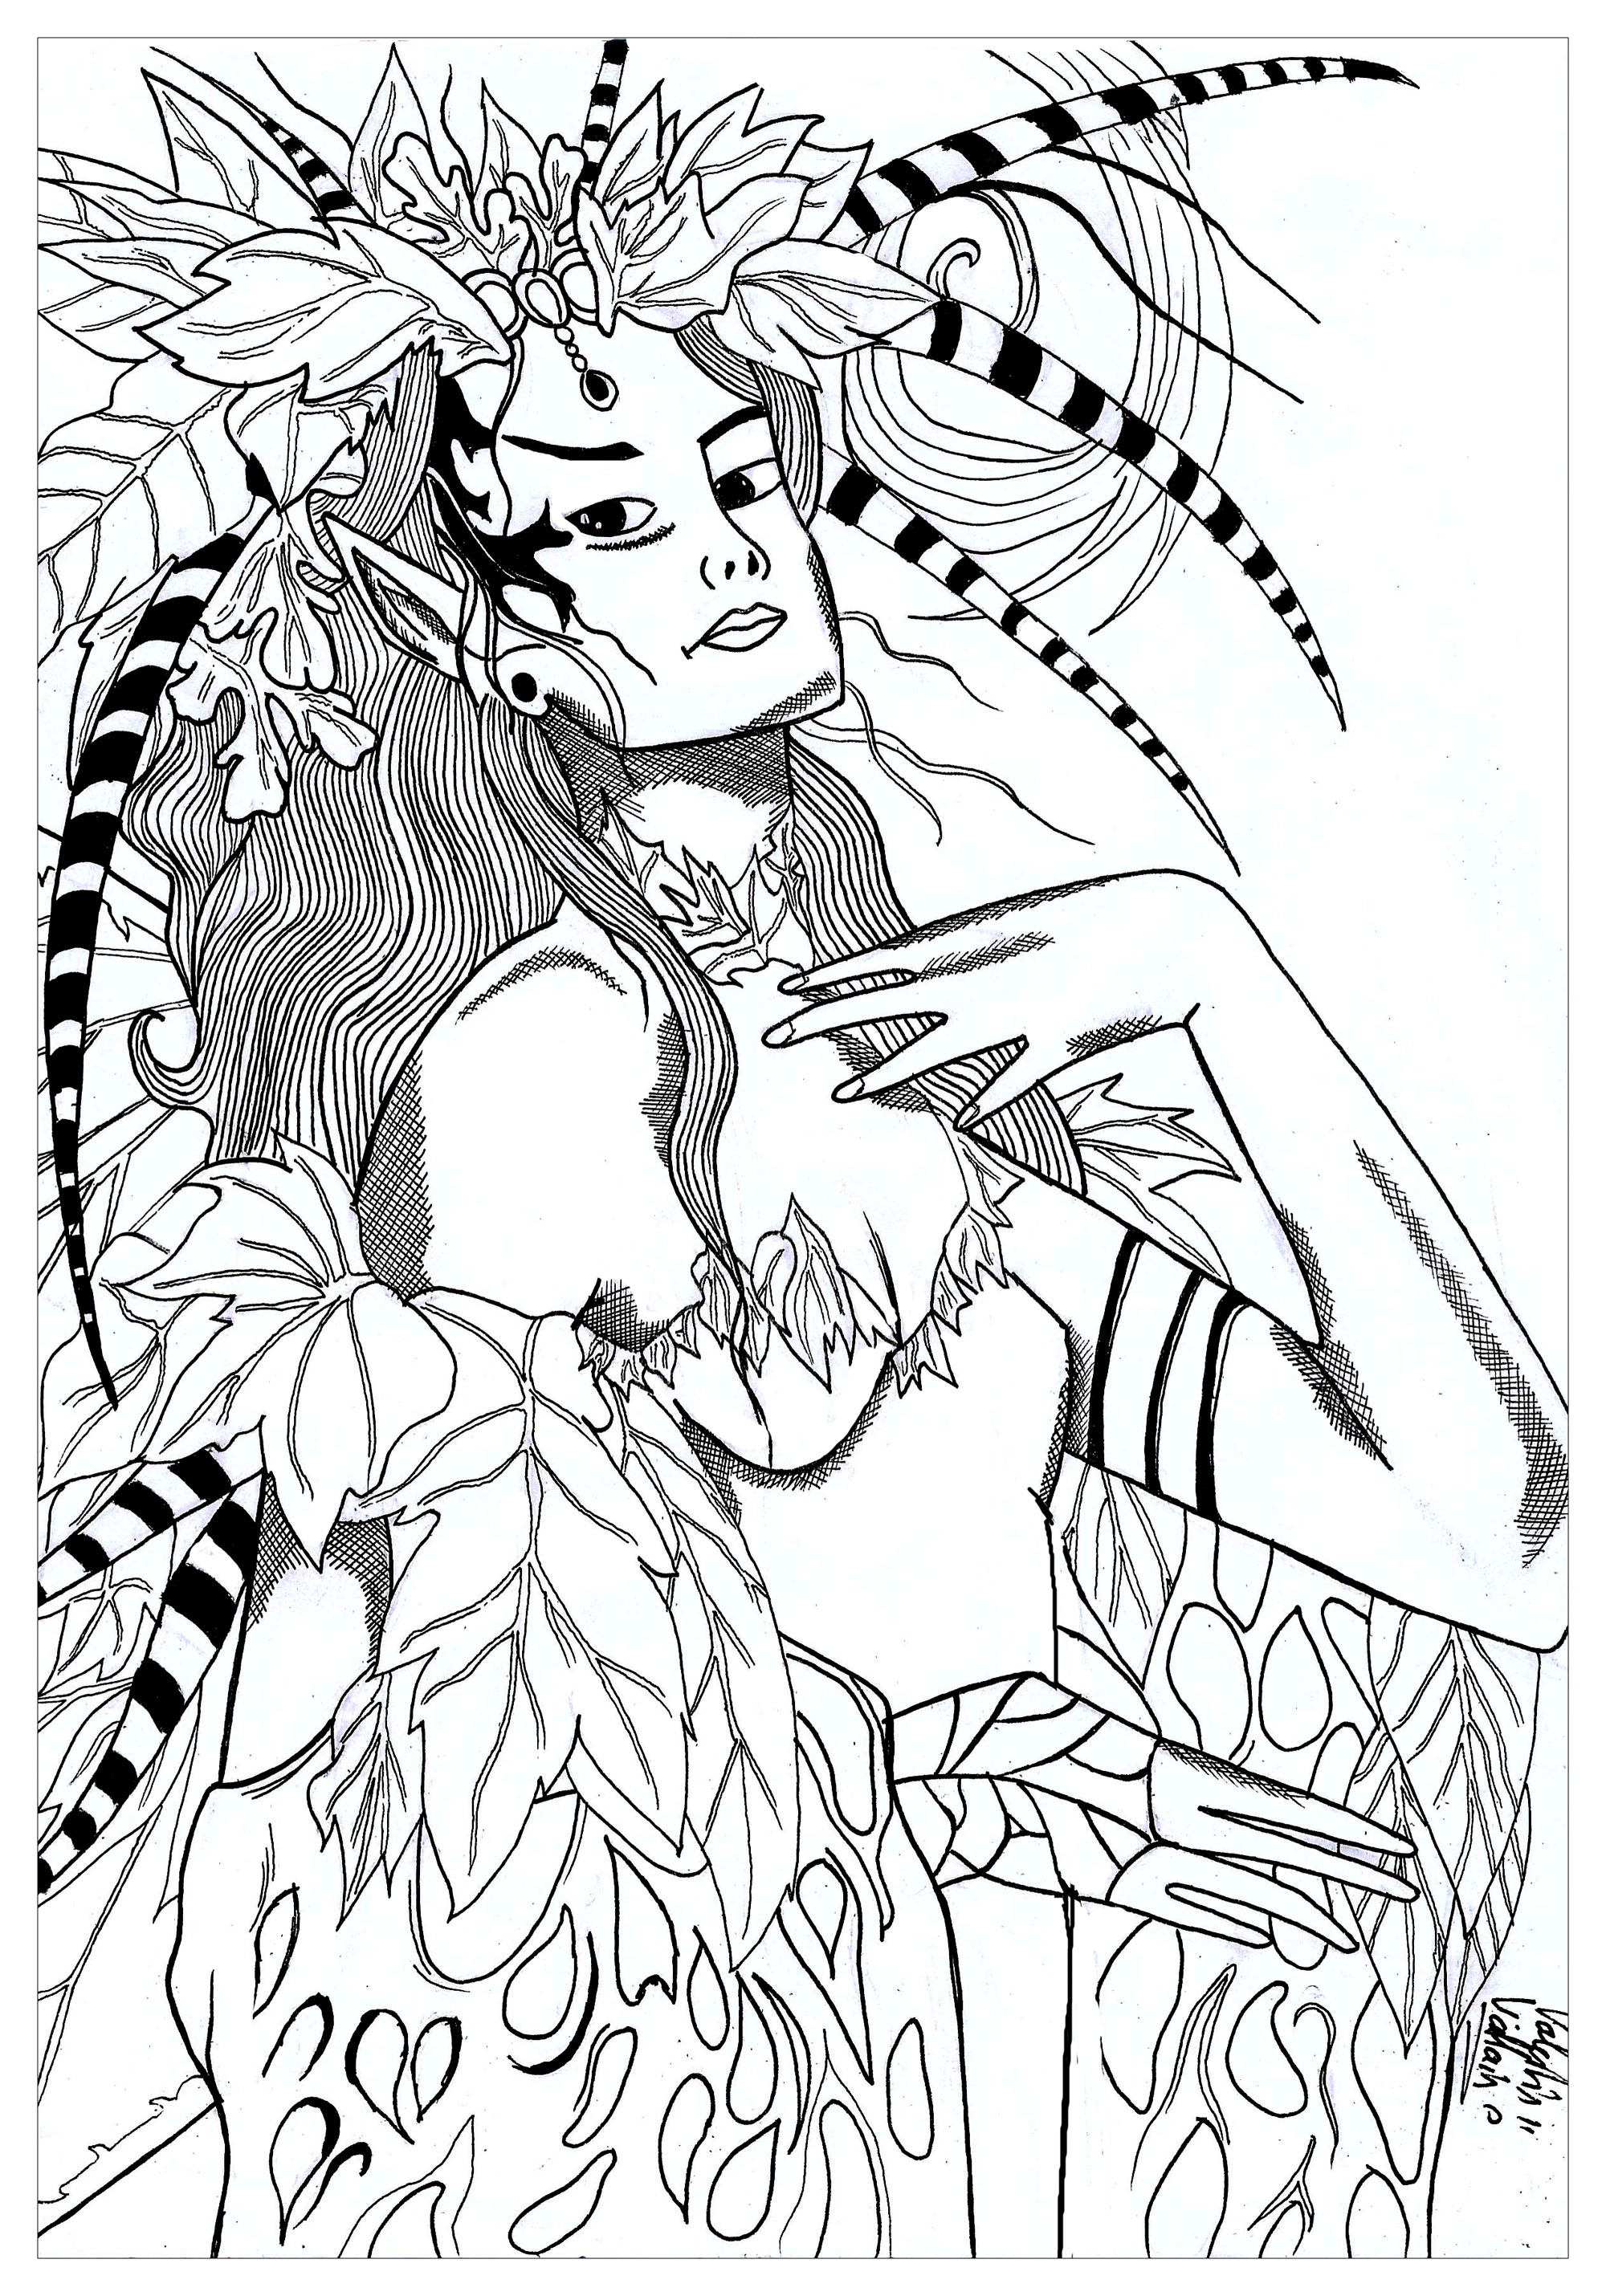 Coloring page of Mother Nature wearing her headdress, Artist : Valentin